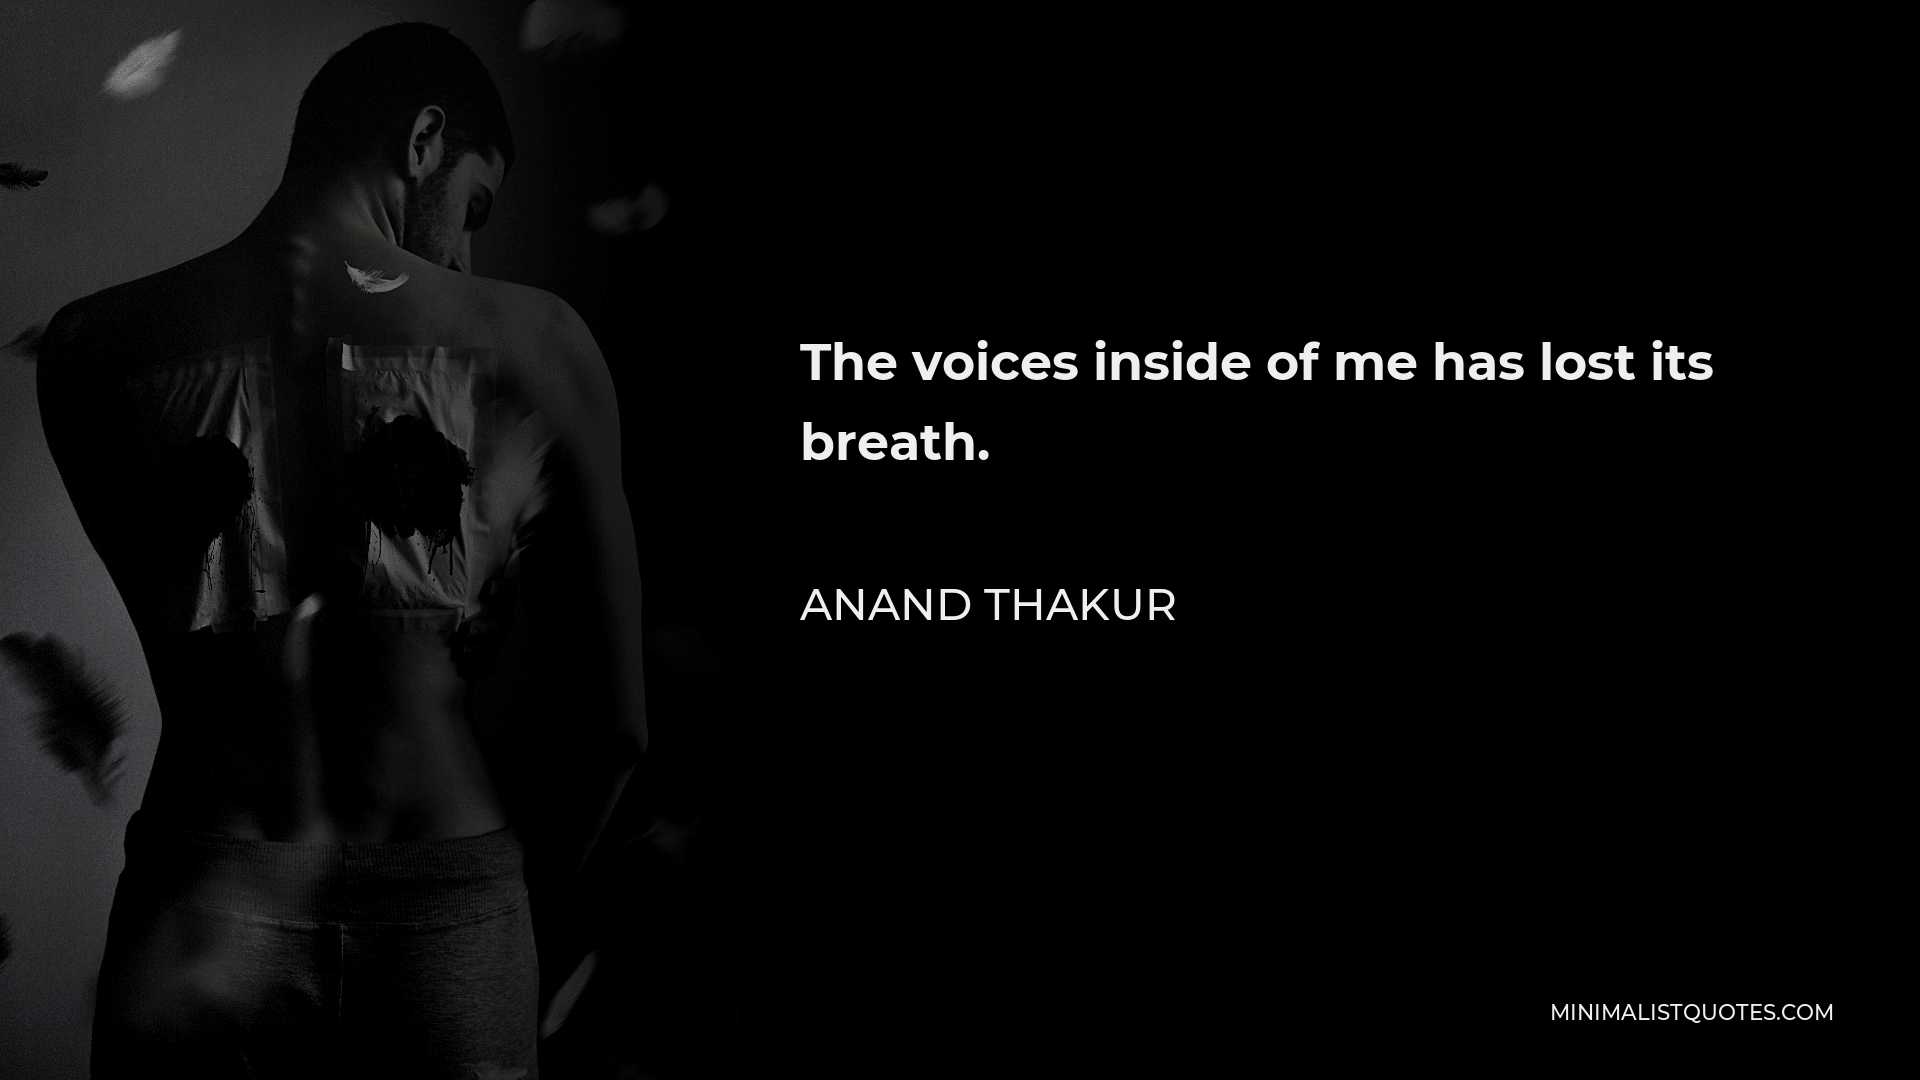 Anand Thakur Quote - The voices inside of me has lost its breath.